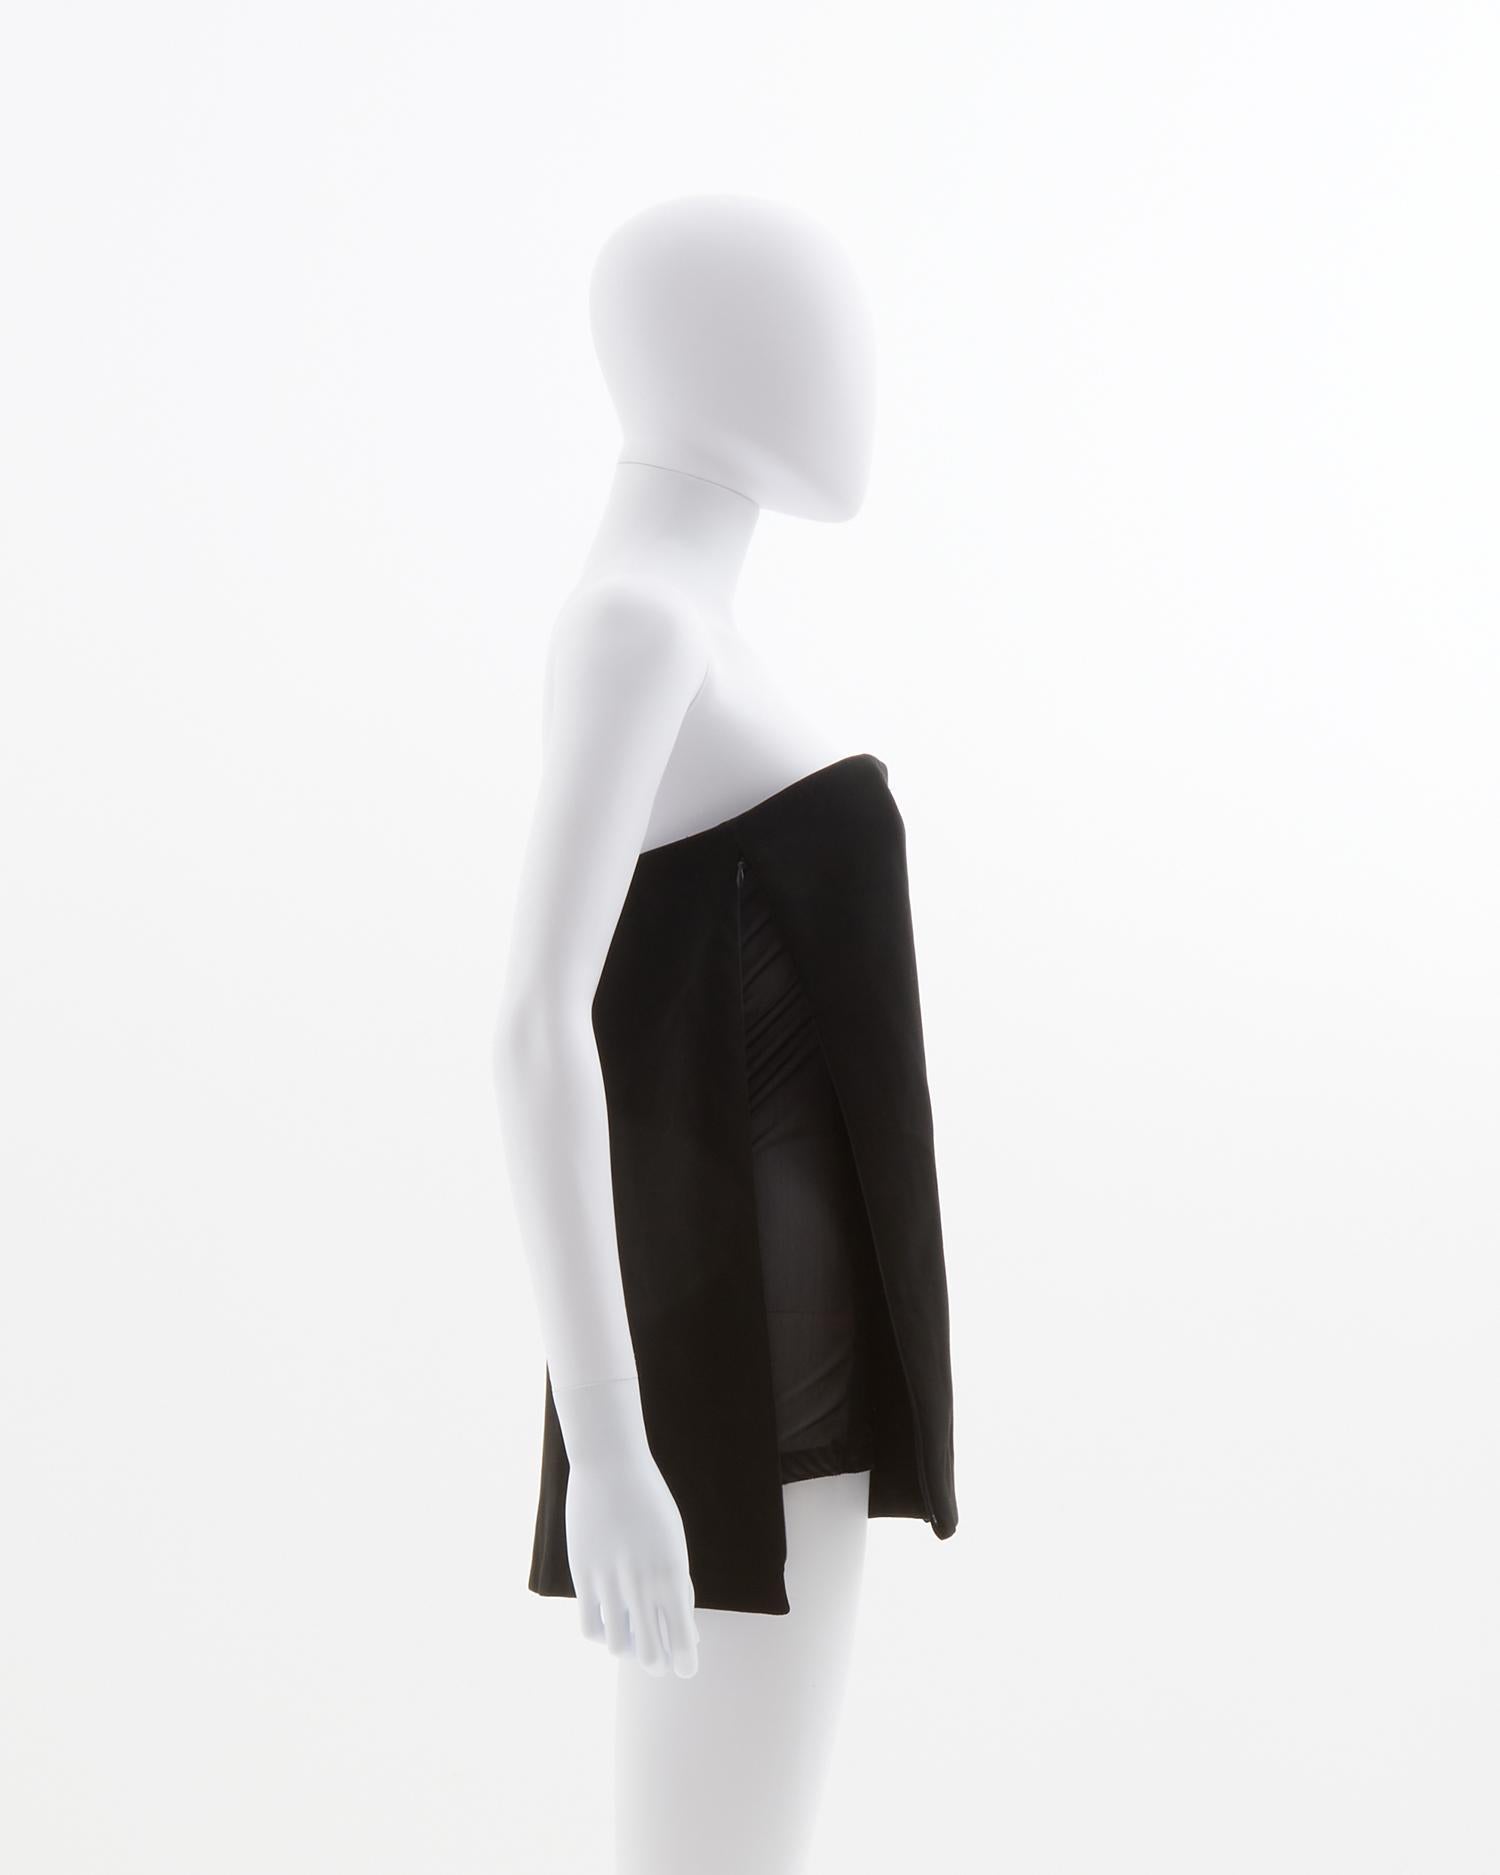 - Runway Look 31
- Sold by Skof.Archive
- Designed by Phoebe Philo 
- Strapless top with bustier at interior dual zipper 
- Fall Winter 2011

Size : 
FR 40 - EN 44 - UK 12 - US 8 (EU)

Composition : 

Fabric1
71% Triacetate
29% Polyester
Fabric2
86%